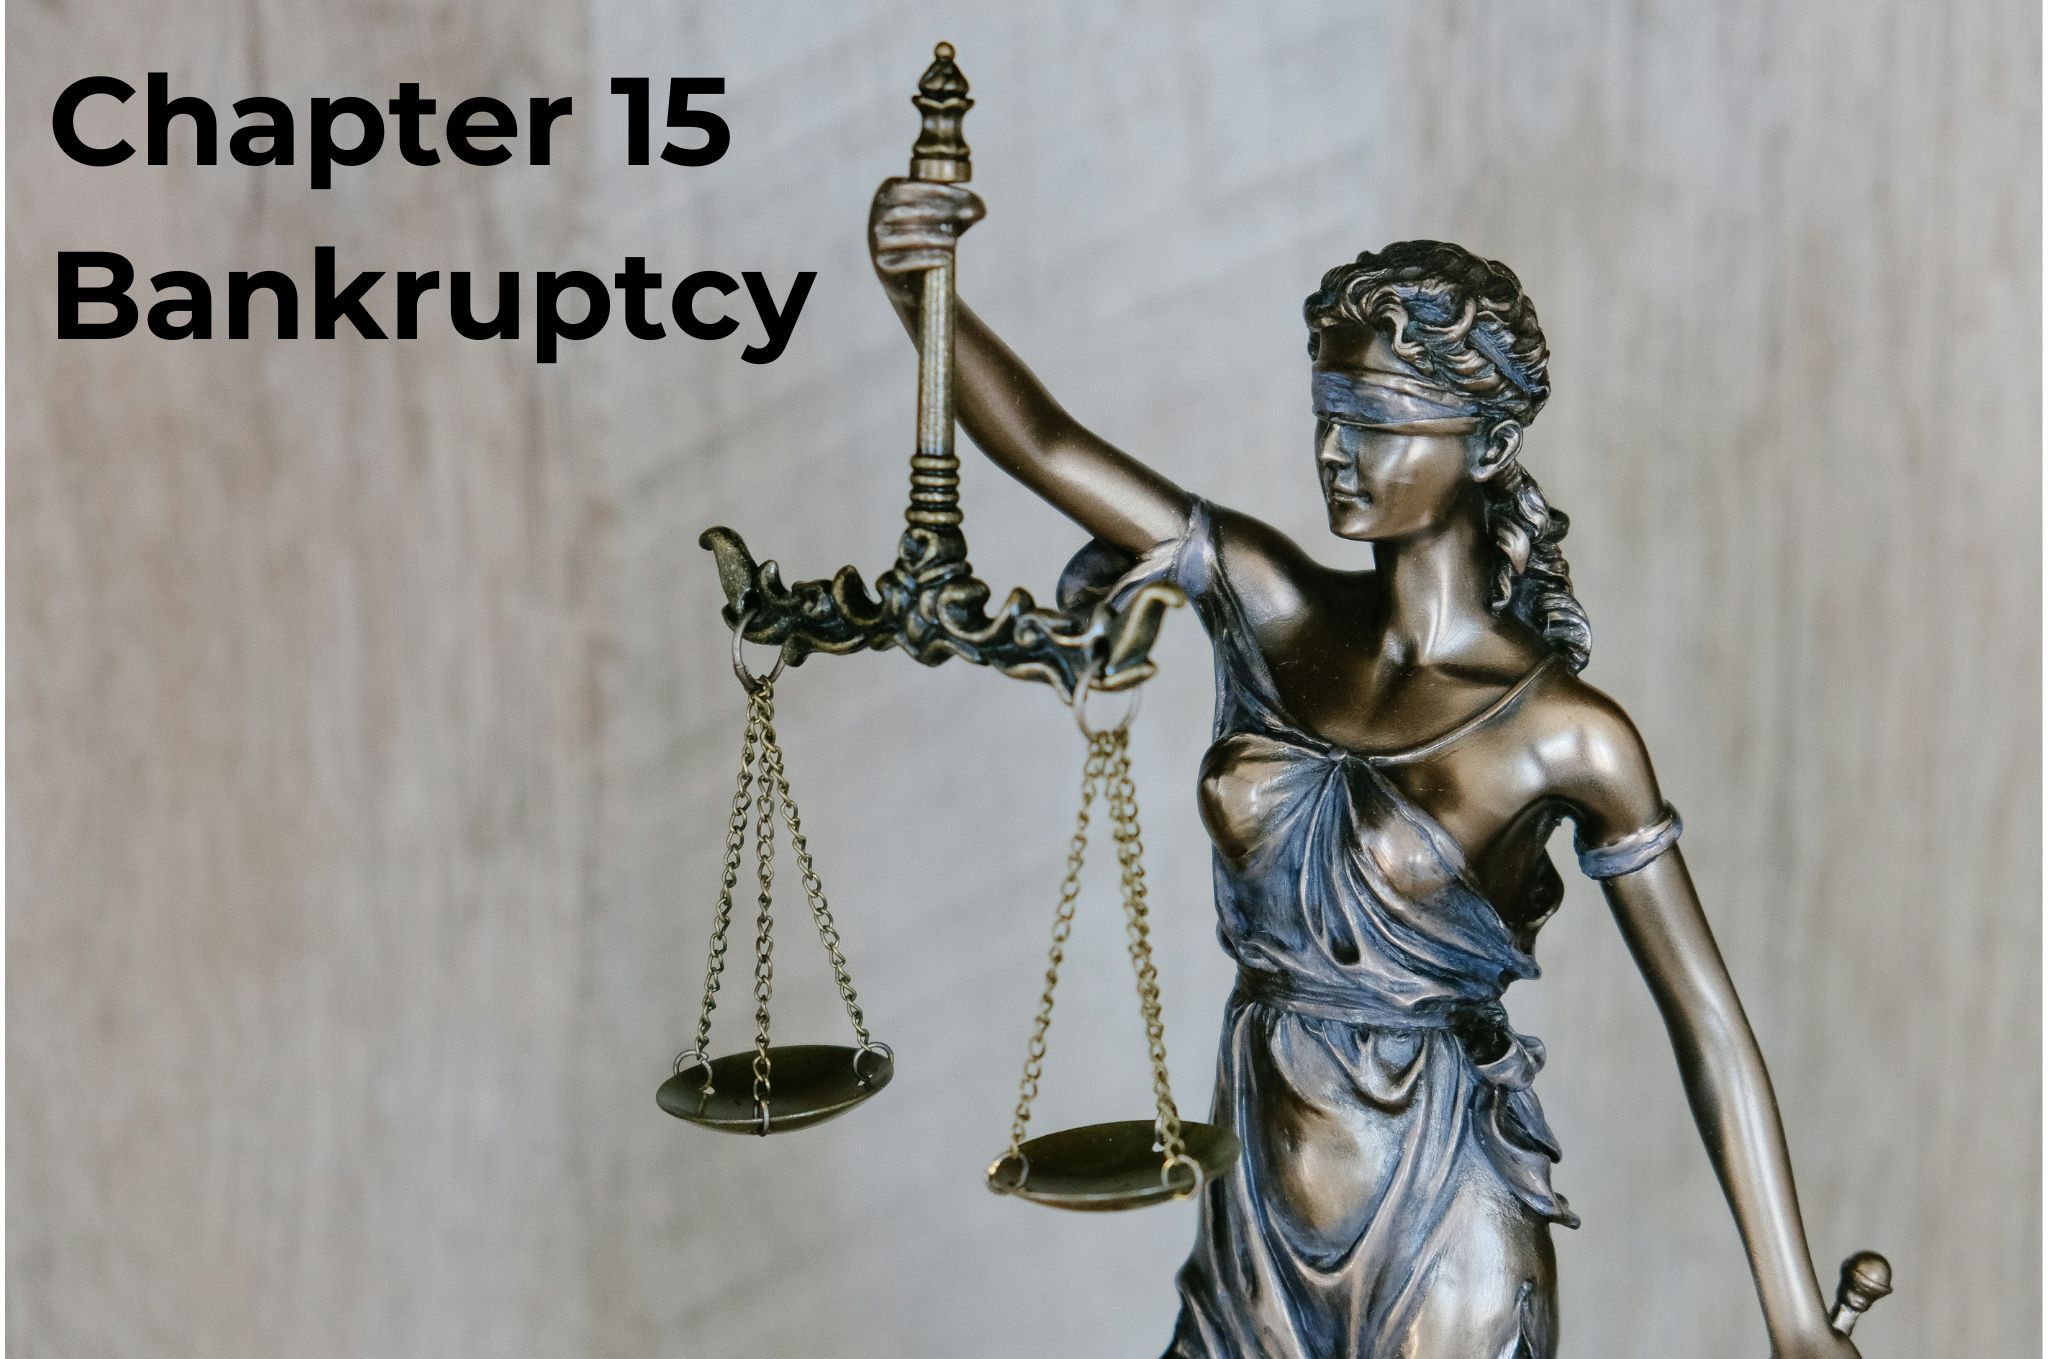 What is Chapter 15 in Bankruptcy?